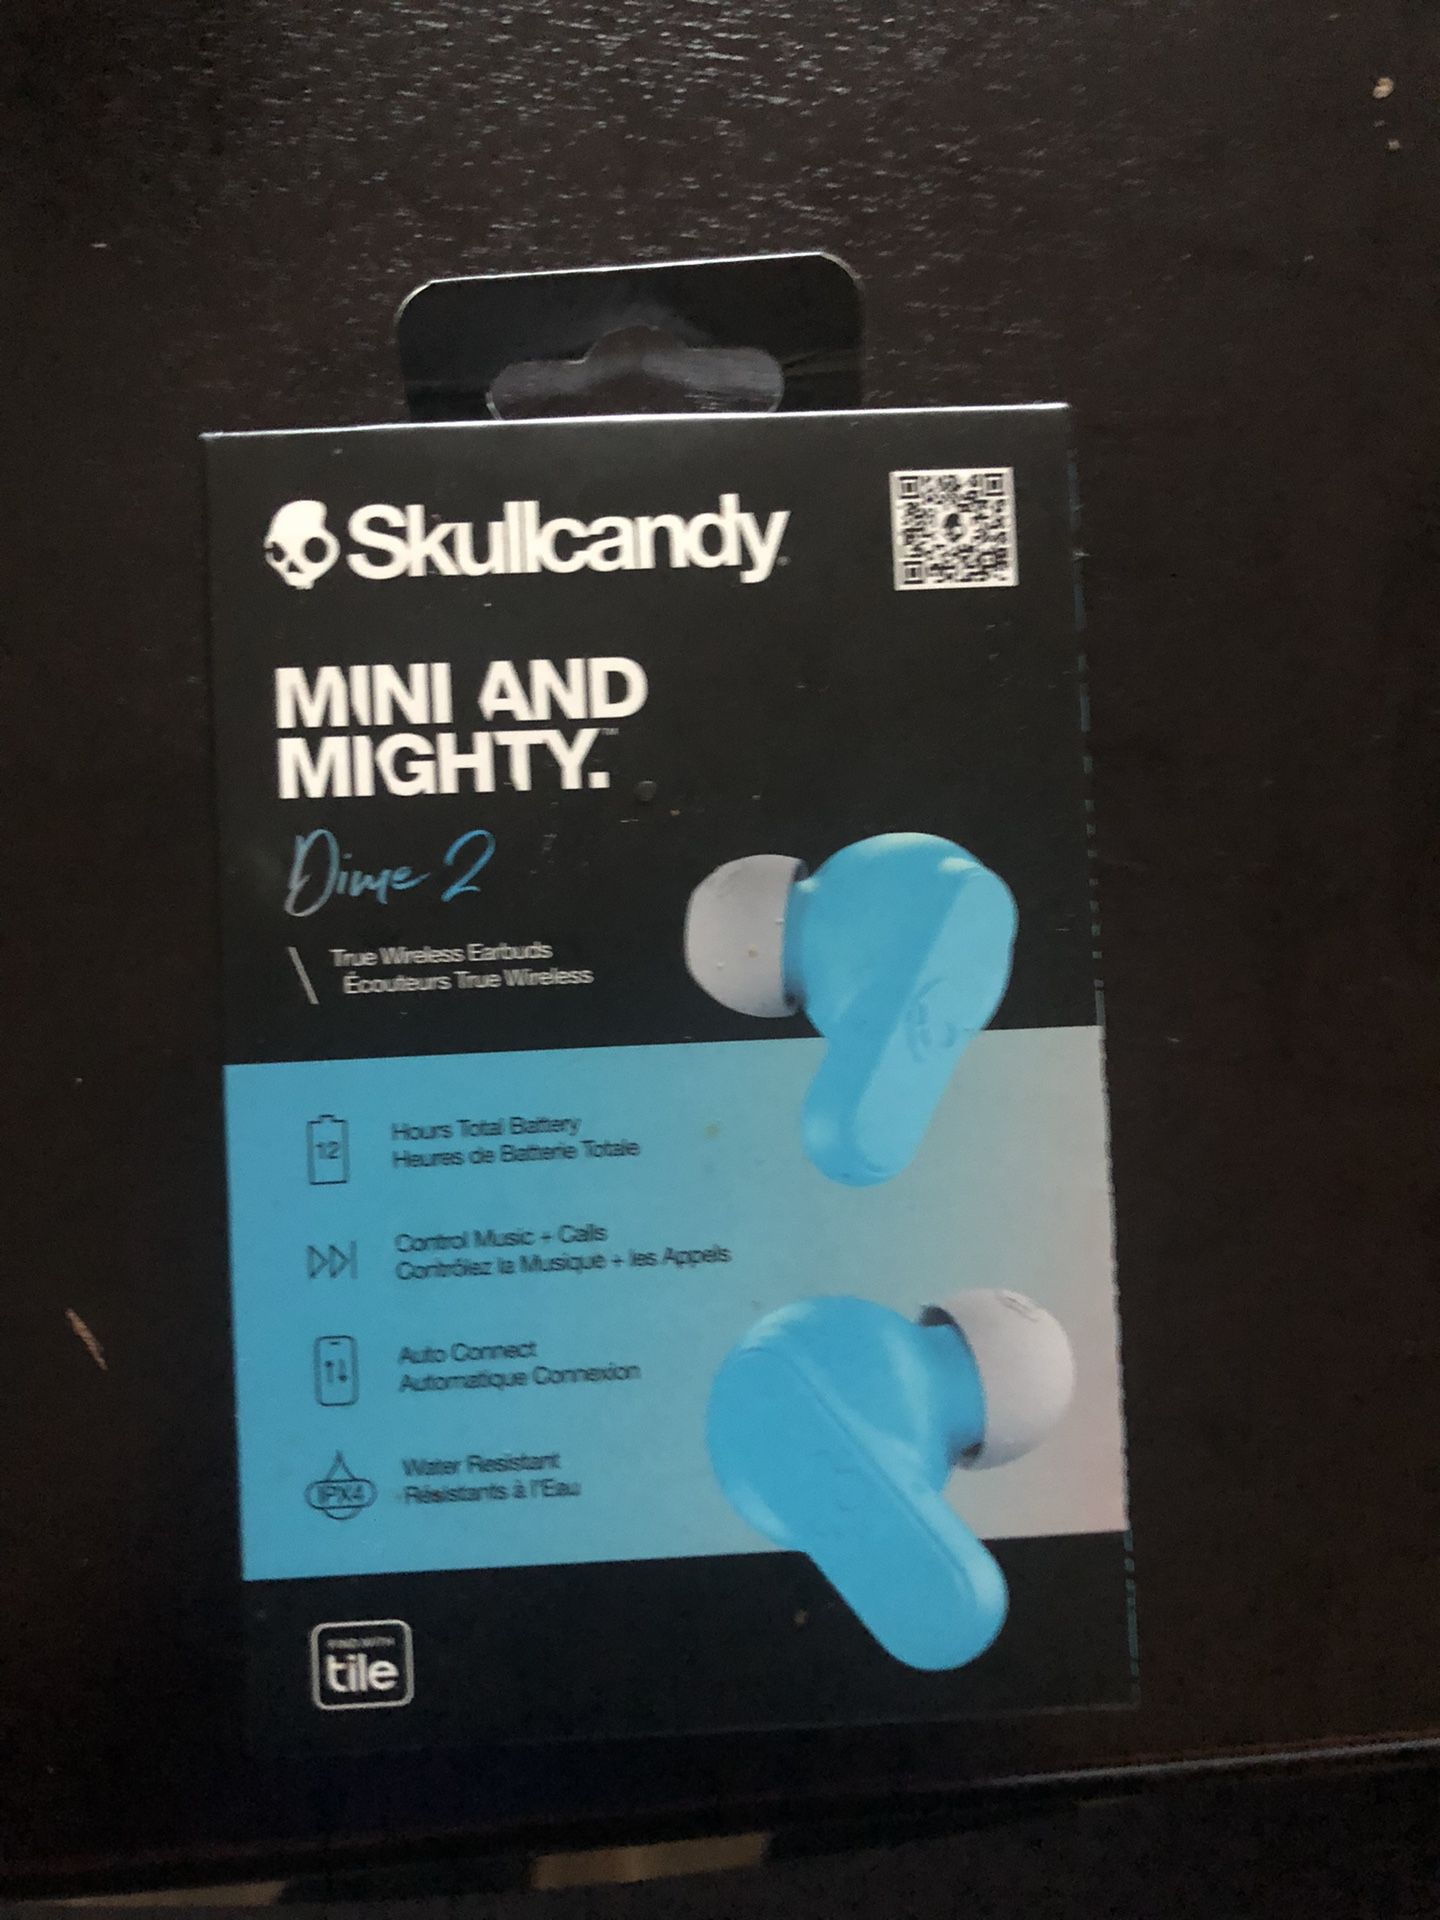 Skullcandy Mini And Mighty DIME 2 